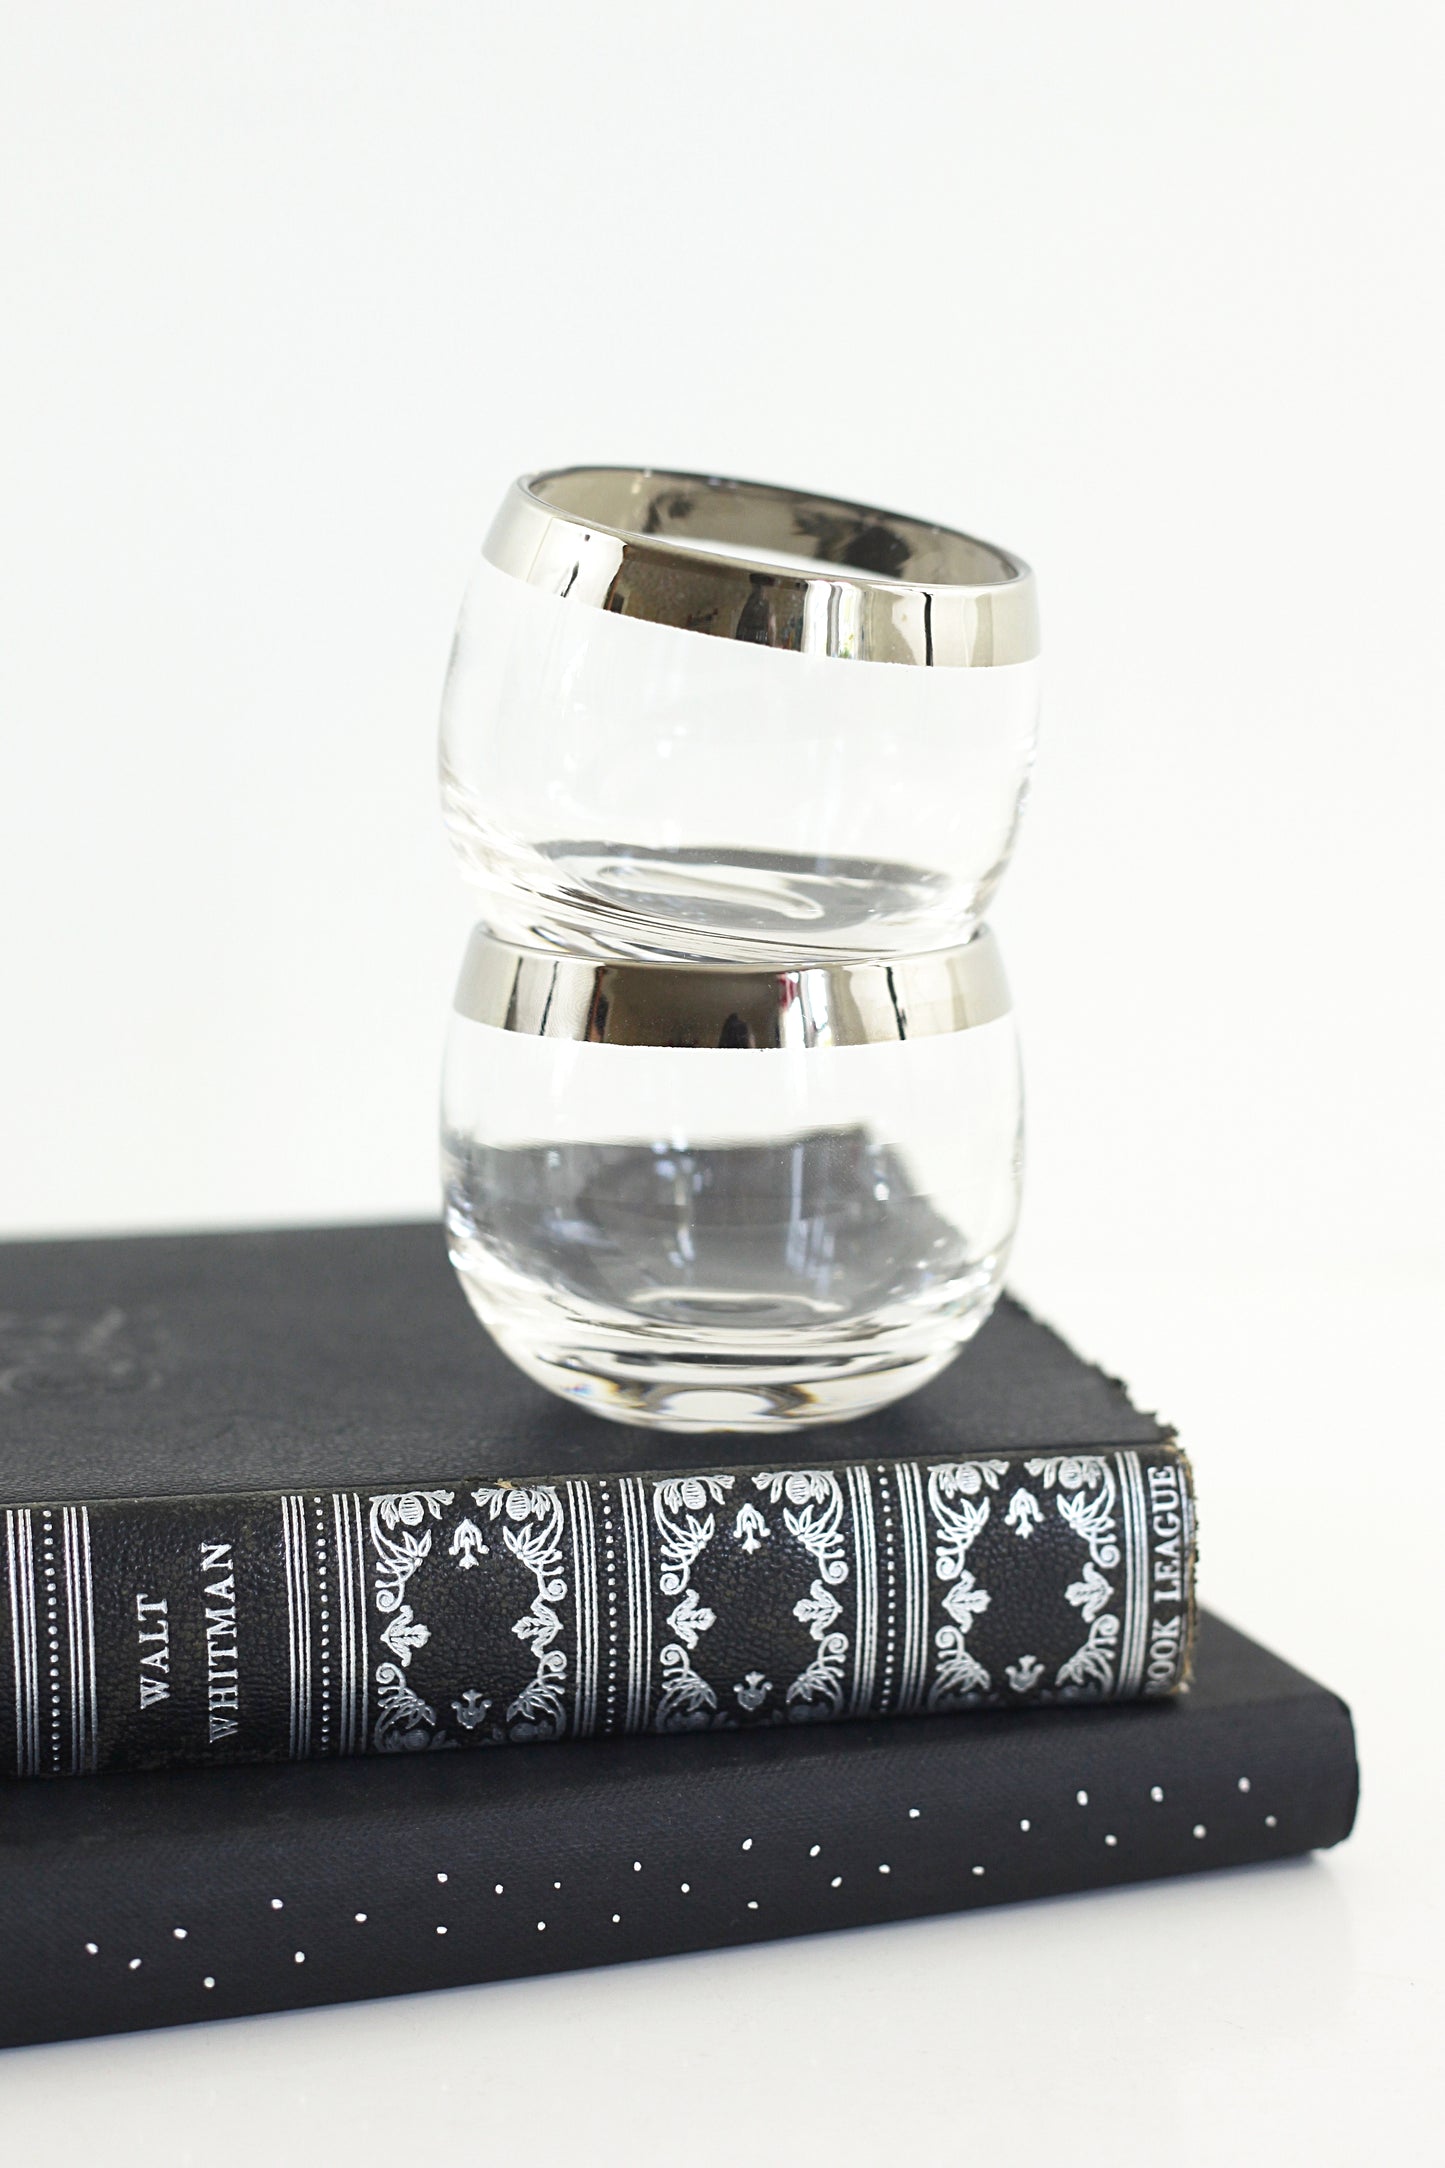 SOLD - Mid Century Modern Silver Rimmed Cocktail Glasses